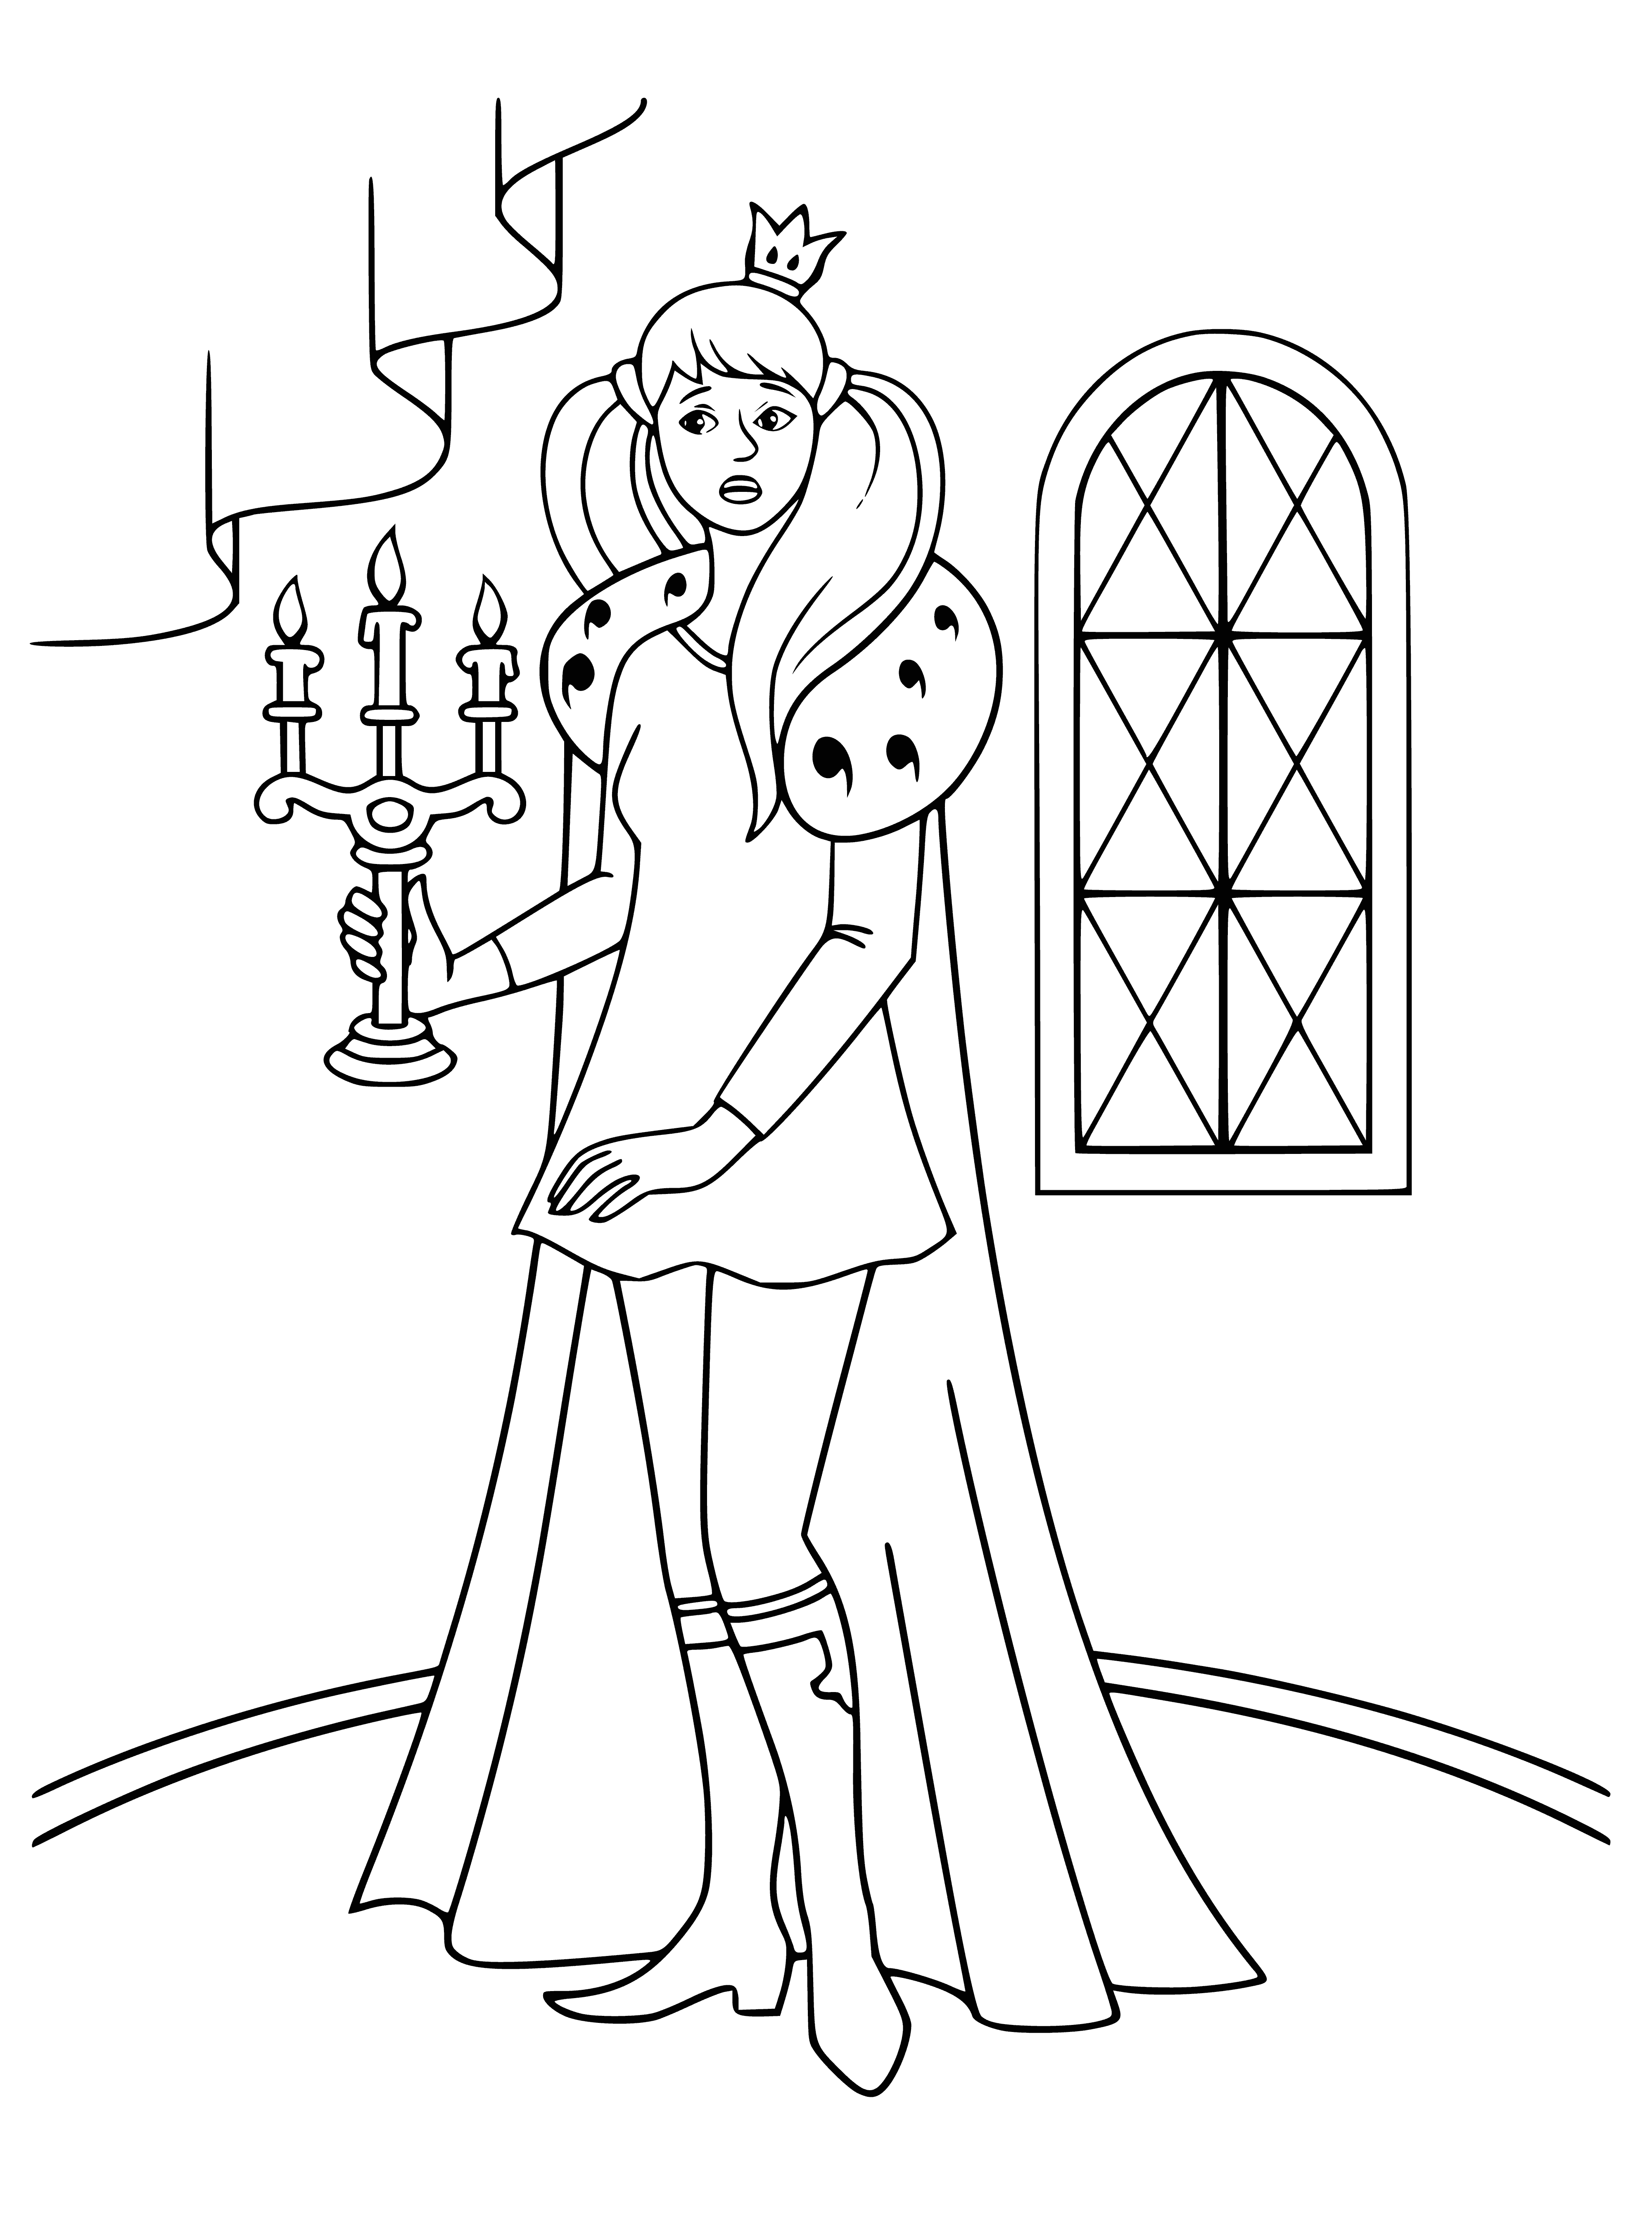 coloring page: Grieving princess in coloring page wears crown and pink dress, hands clasped in front. She looks sad and lost, eyes red and puffy as if she has been crying.